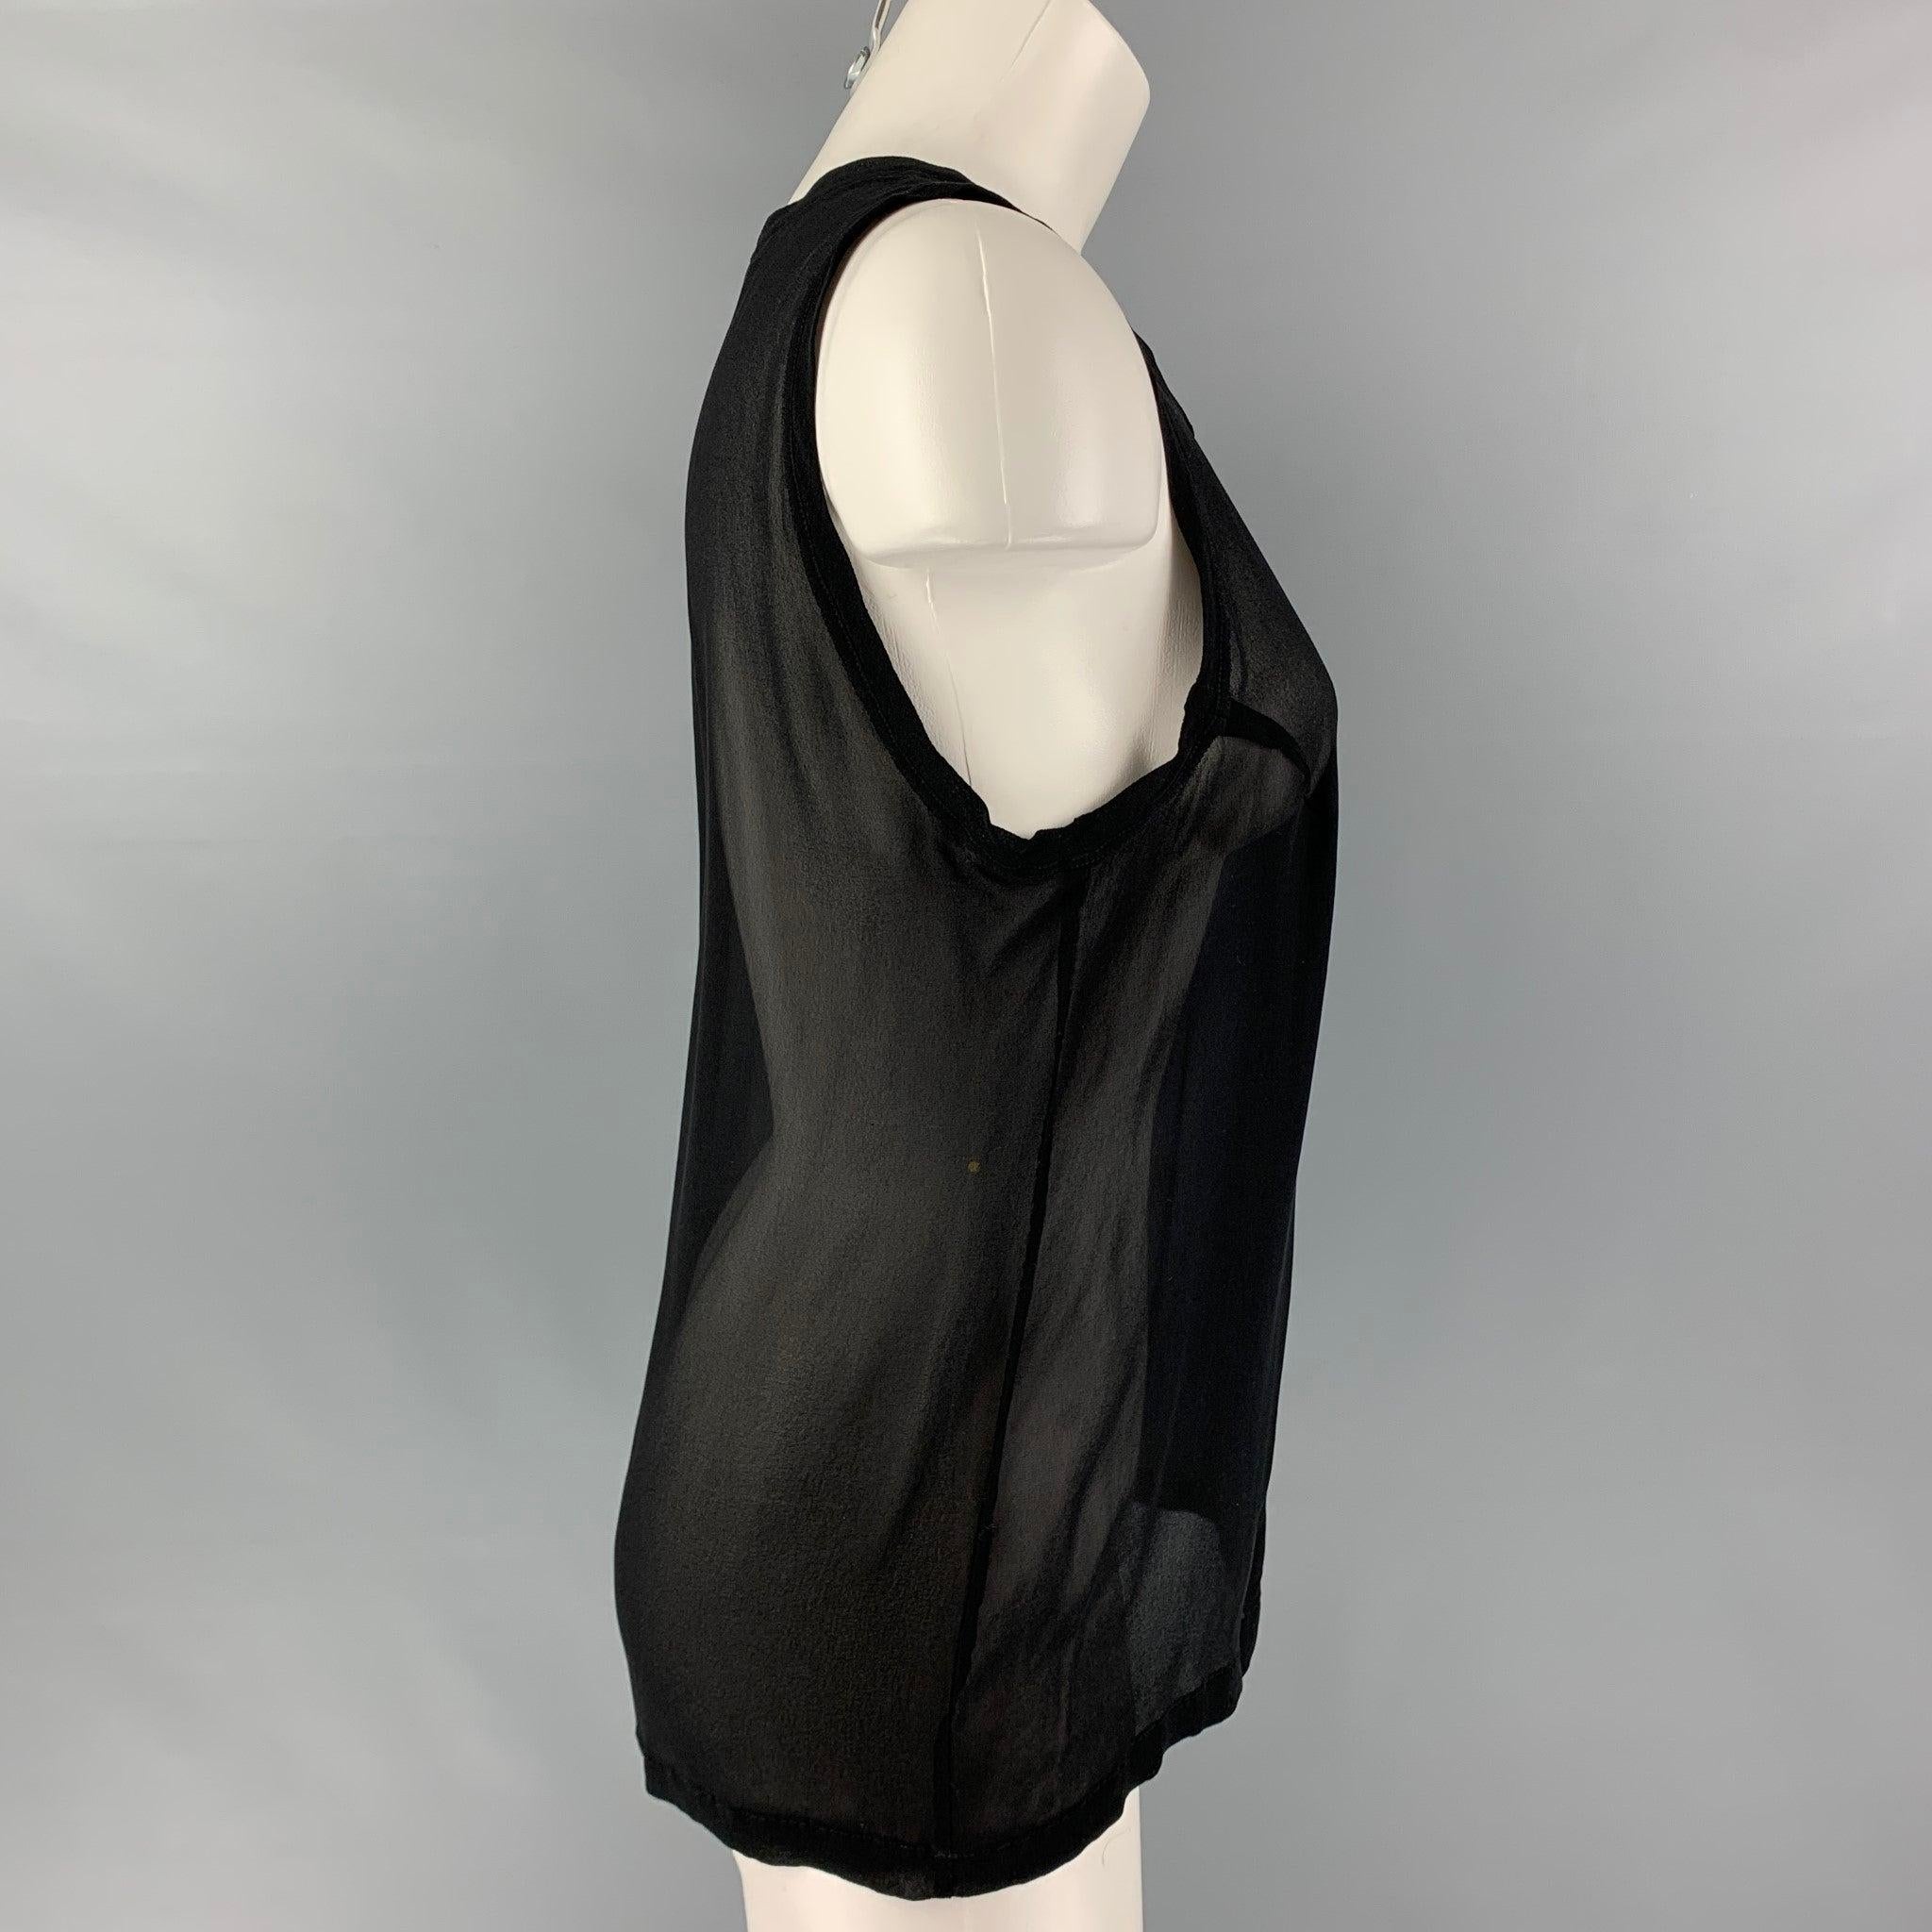 YVES SAINT LAURENT tank top black silk fabric featuring a see through style at back. Made in Italy.Excellent Pre-Owned Condition. 
 

 Marked:  L 
 

 Measurements: 
  Bust: 38 inches Length: 24.5 inches 
  
  
  
 Sui Generis Reference: 121348
